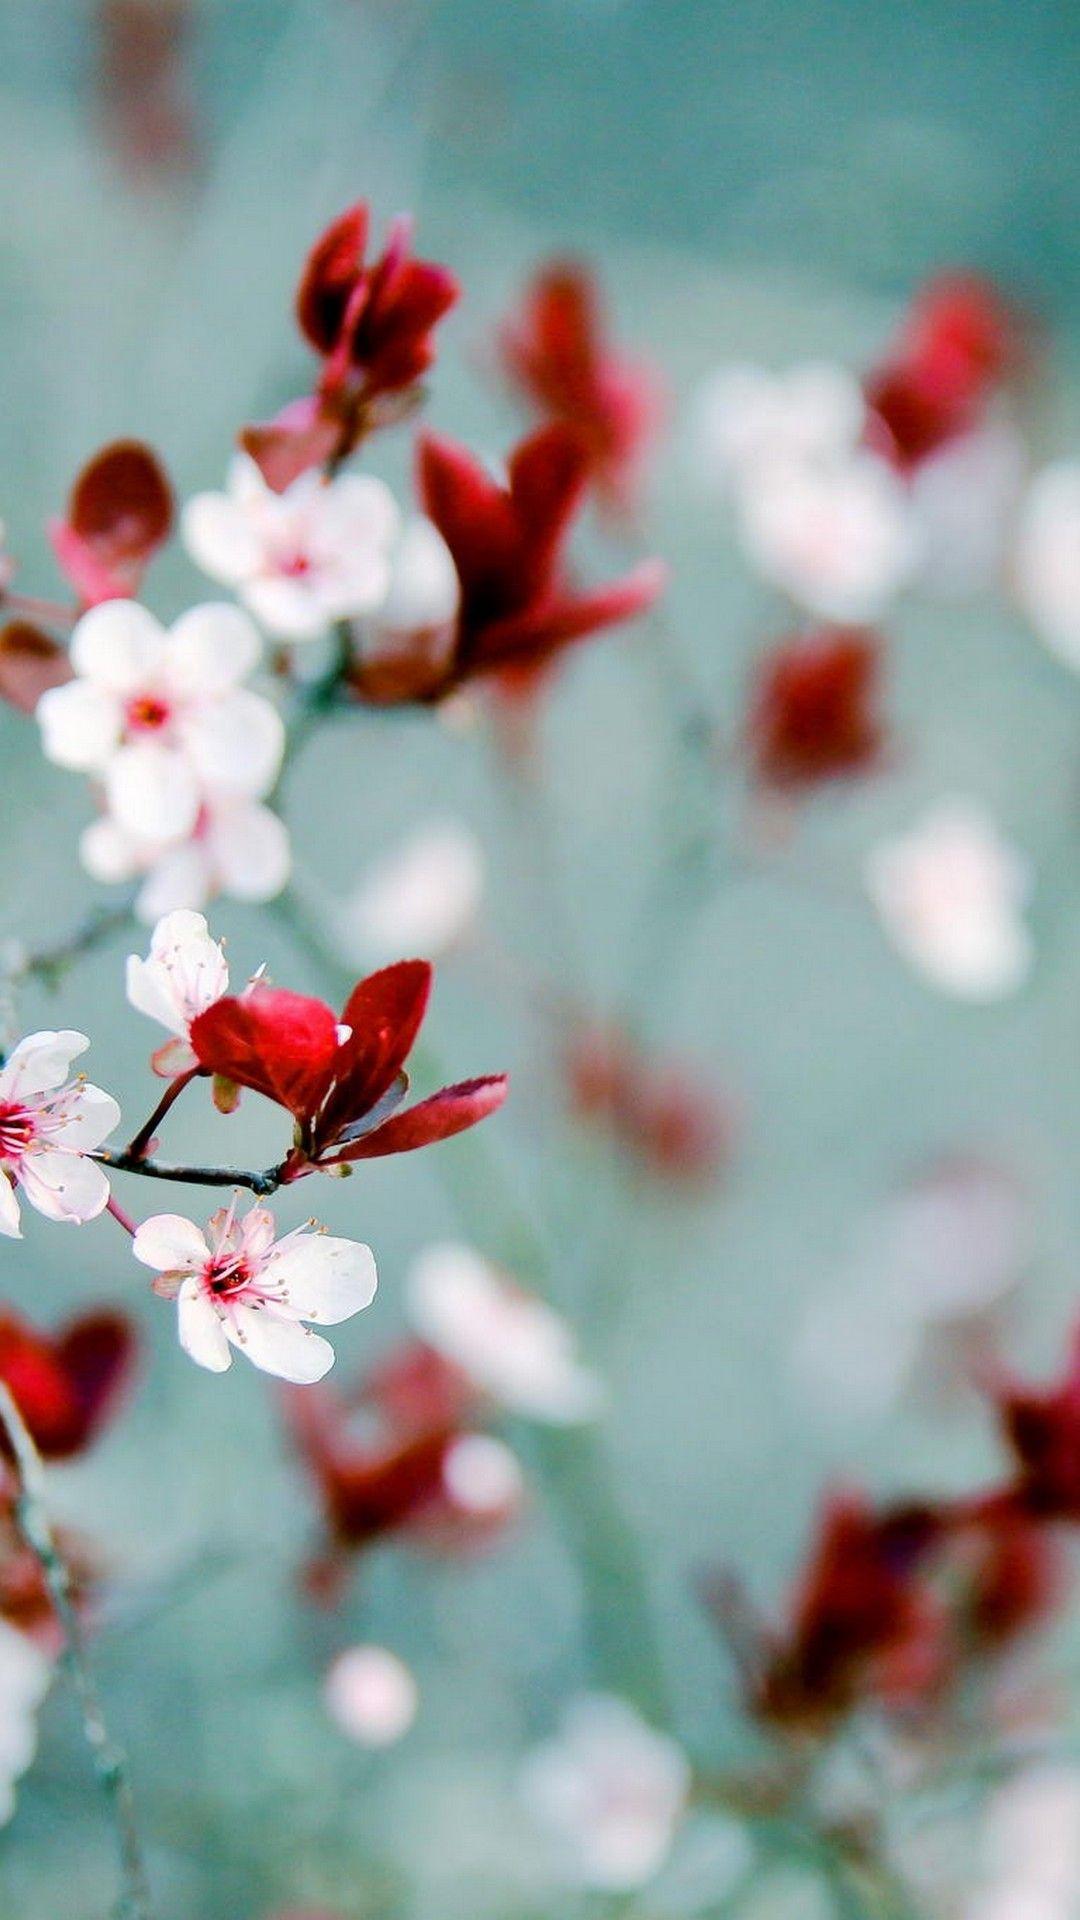 Spring Wallpaper For Android Android Wallpaper. Spring wallpaper, Spring picture, Hello spring wallpaper